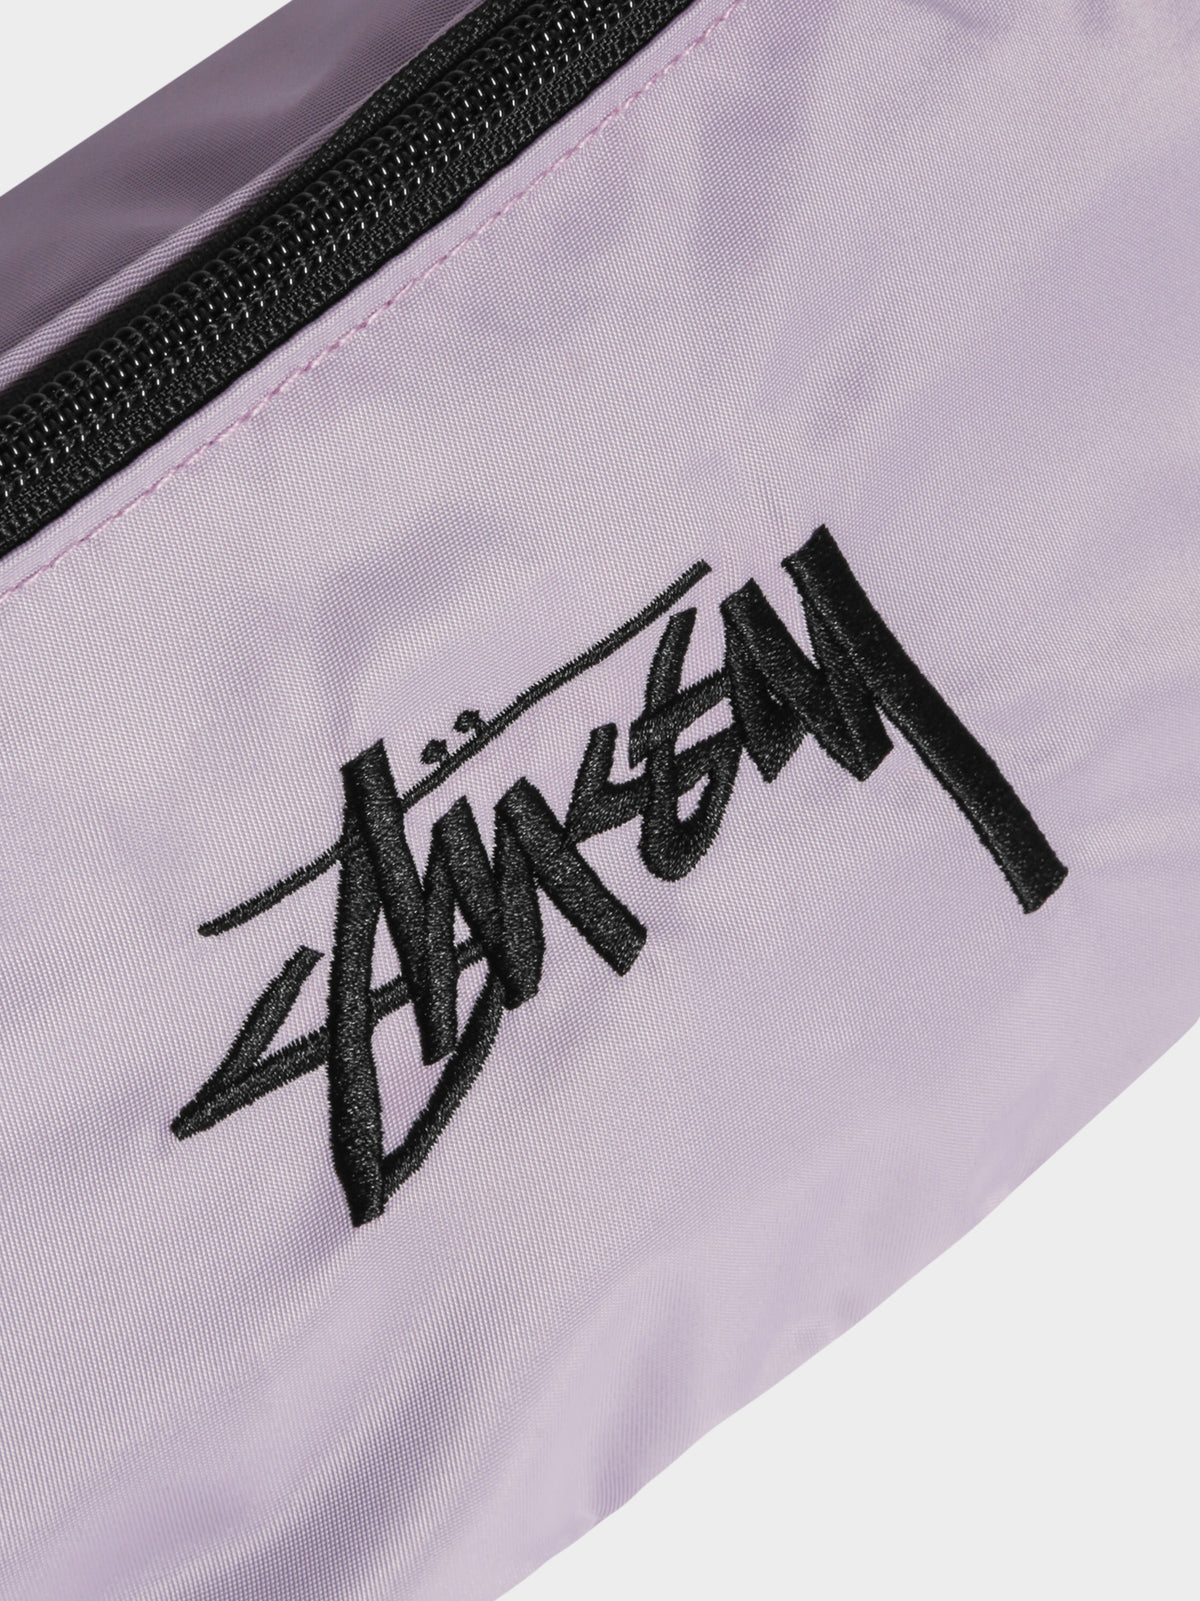 Stock Waistbag in Lilac